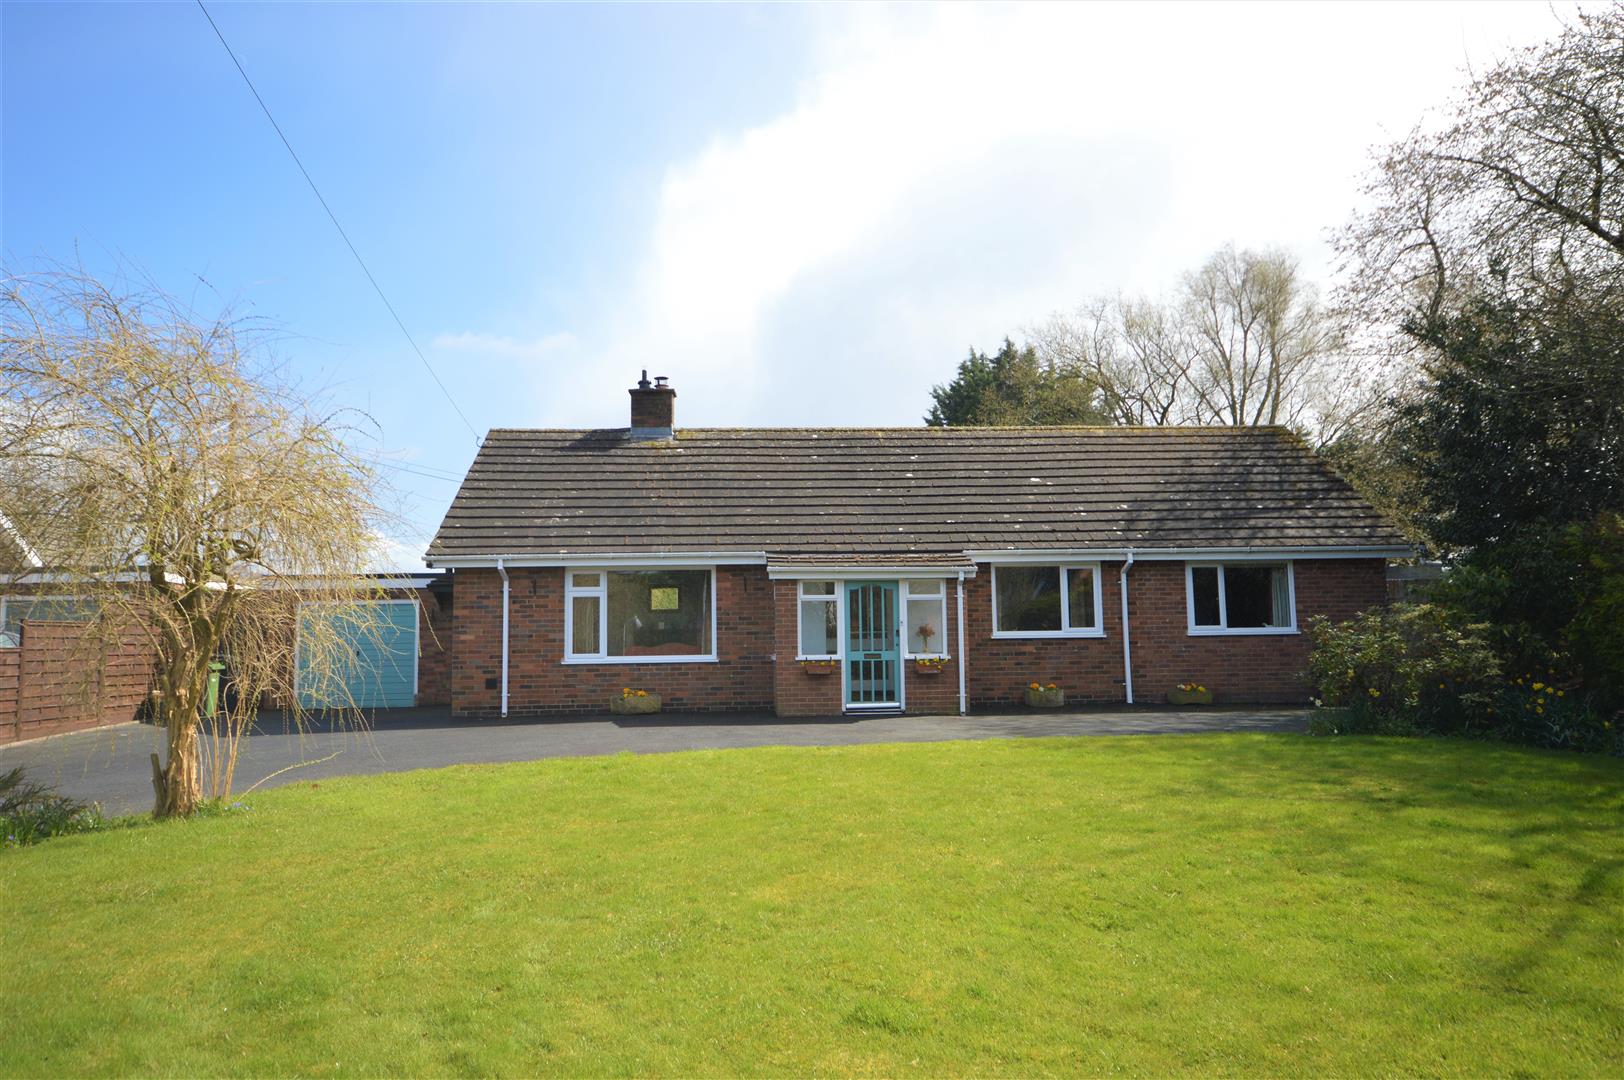 4 bed detached bungalow for sale in Yarpole, HR6